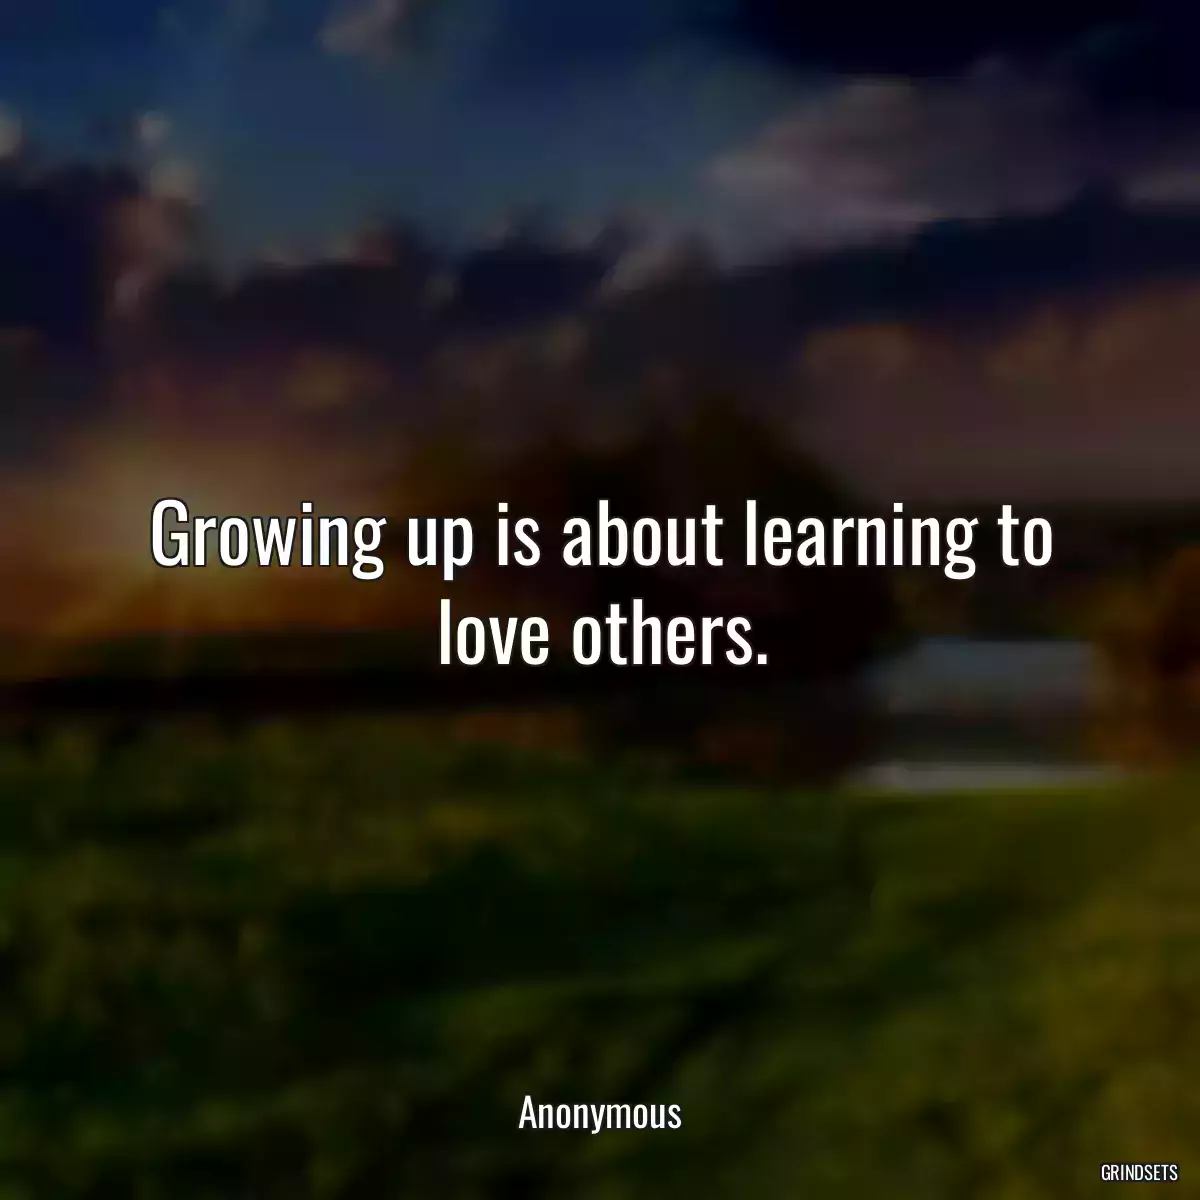 Growing up is about learning to love others.